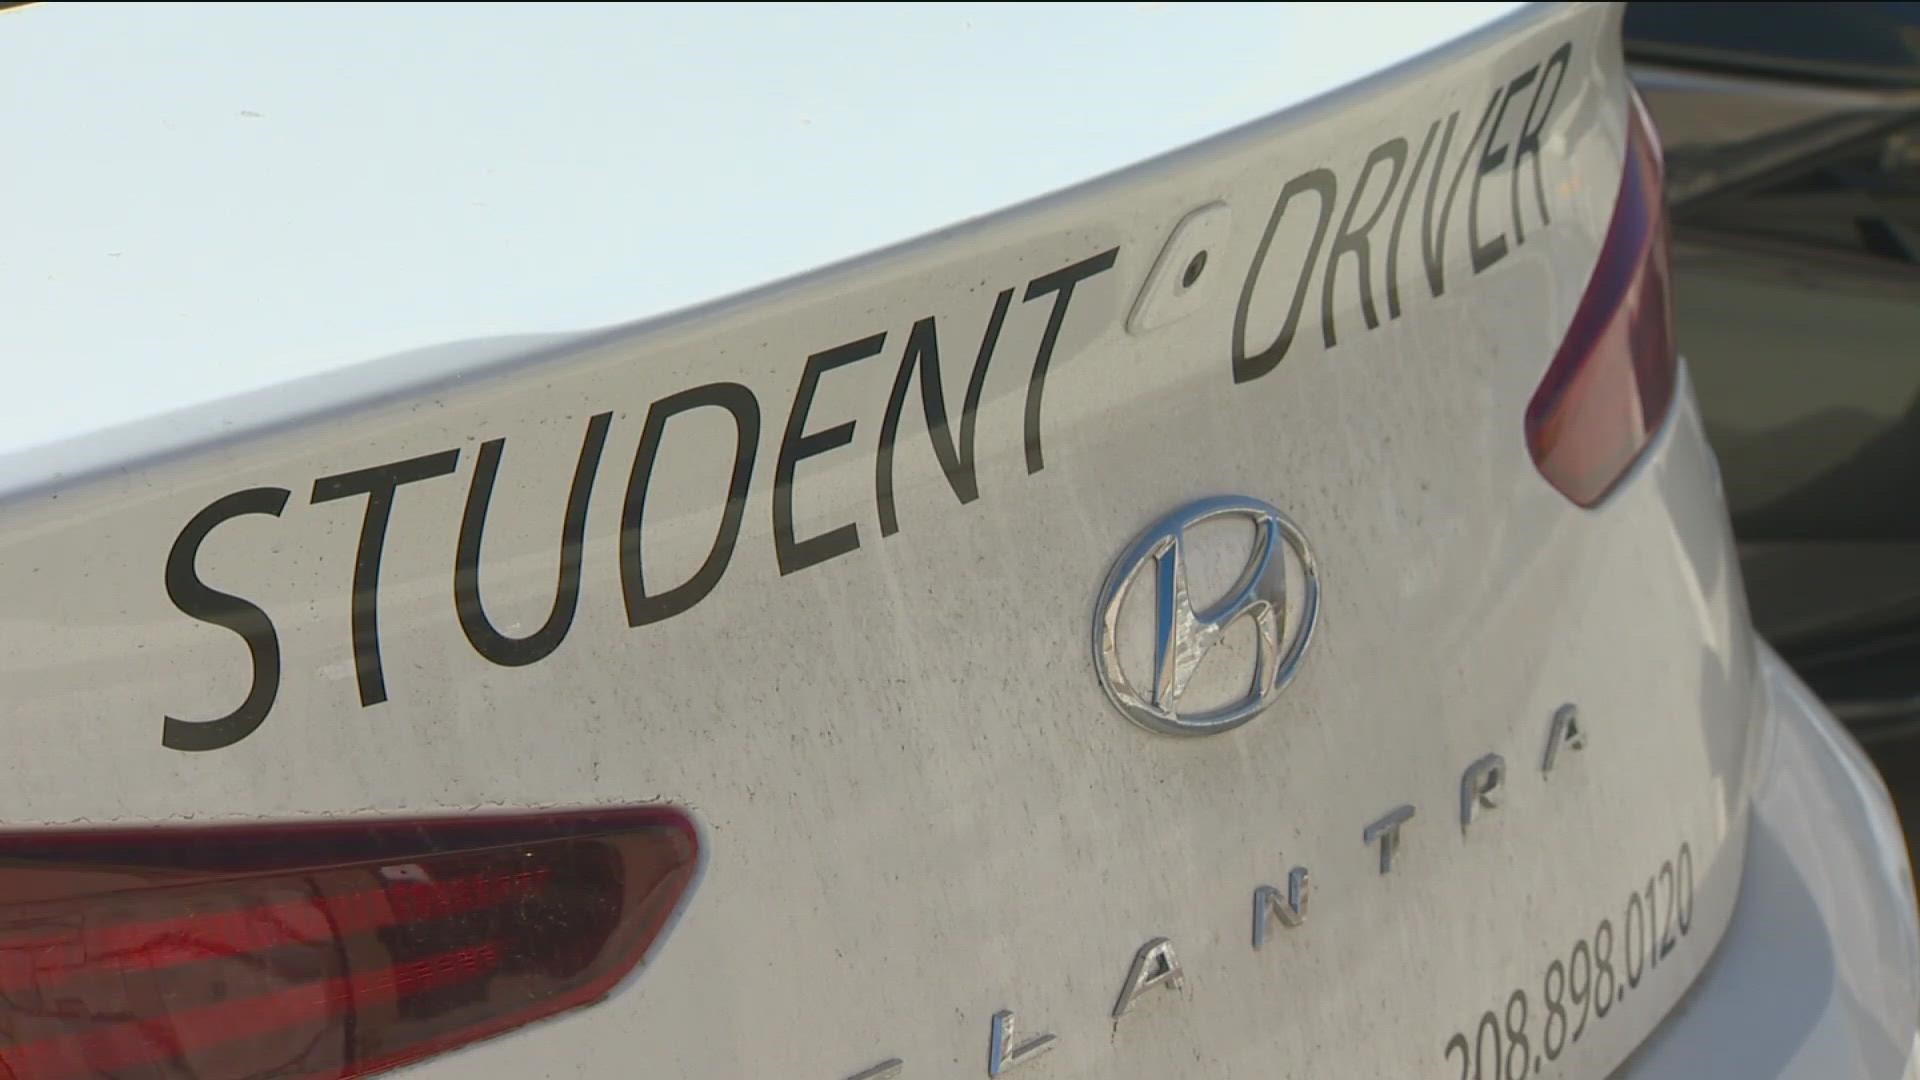 Lawmakers update a bill to facilitate student drivers in getting their licenses, however, some say the updates aren't quite applicable and still need to be refined.